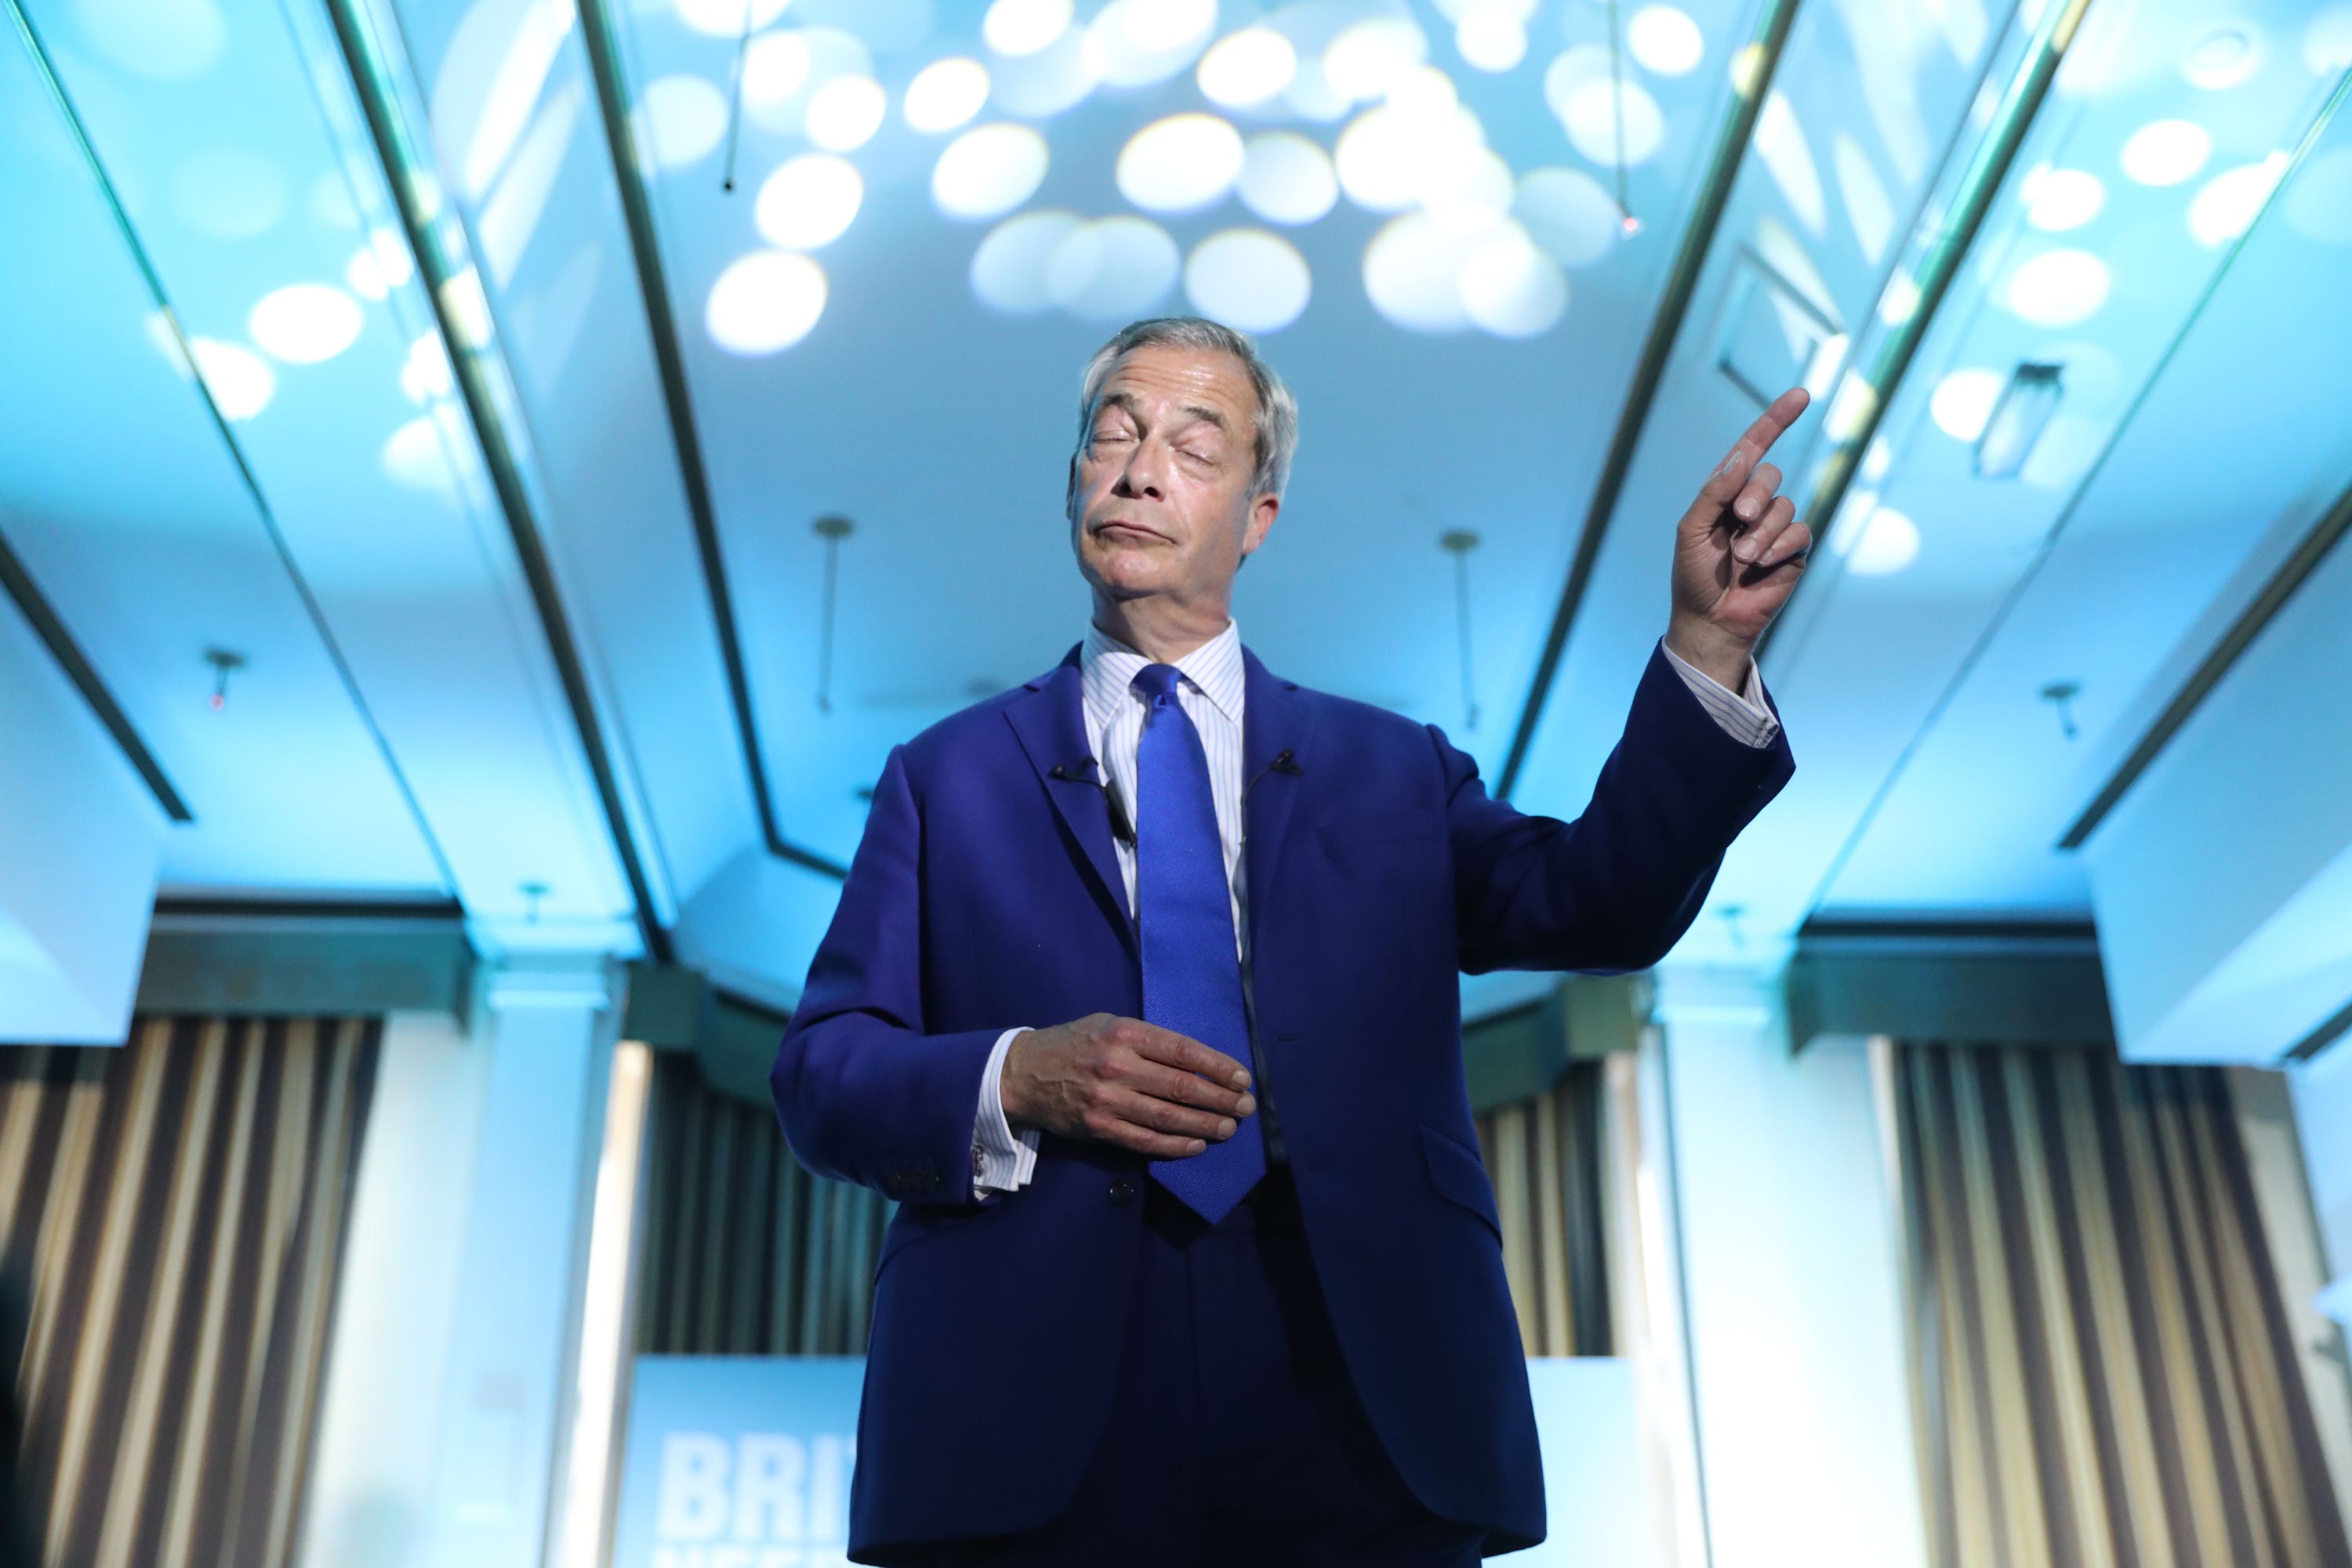 Reform UK leader Nigel Farage has spoken out in support of Andrew Tate